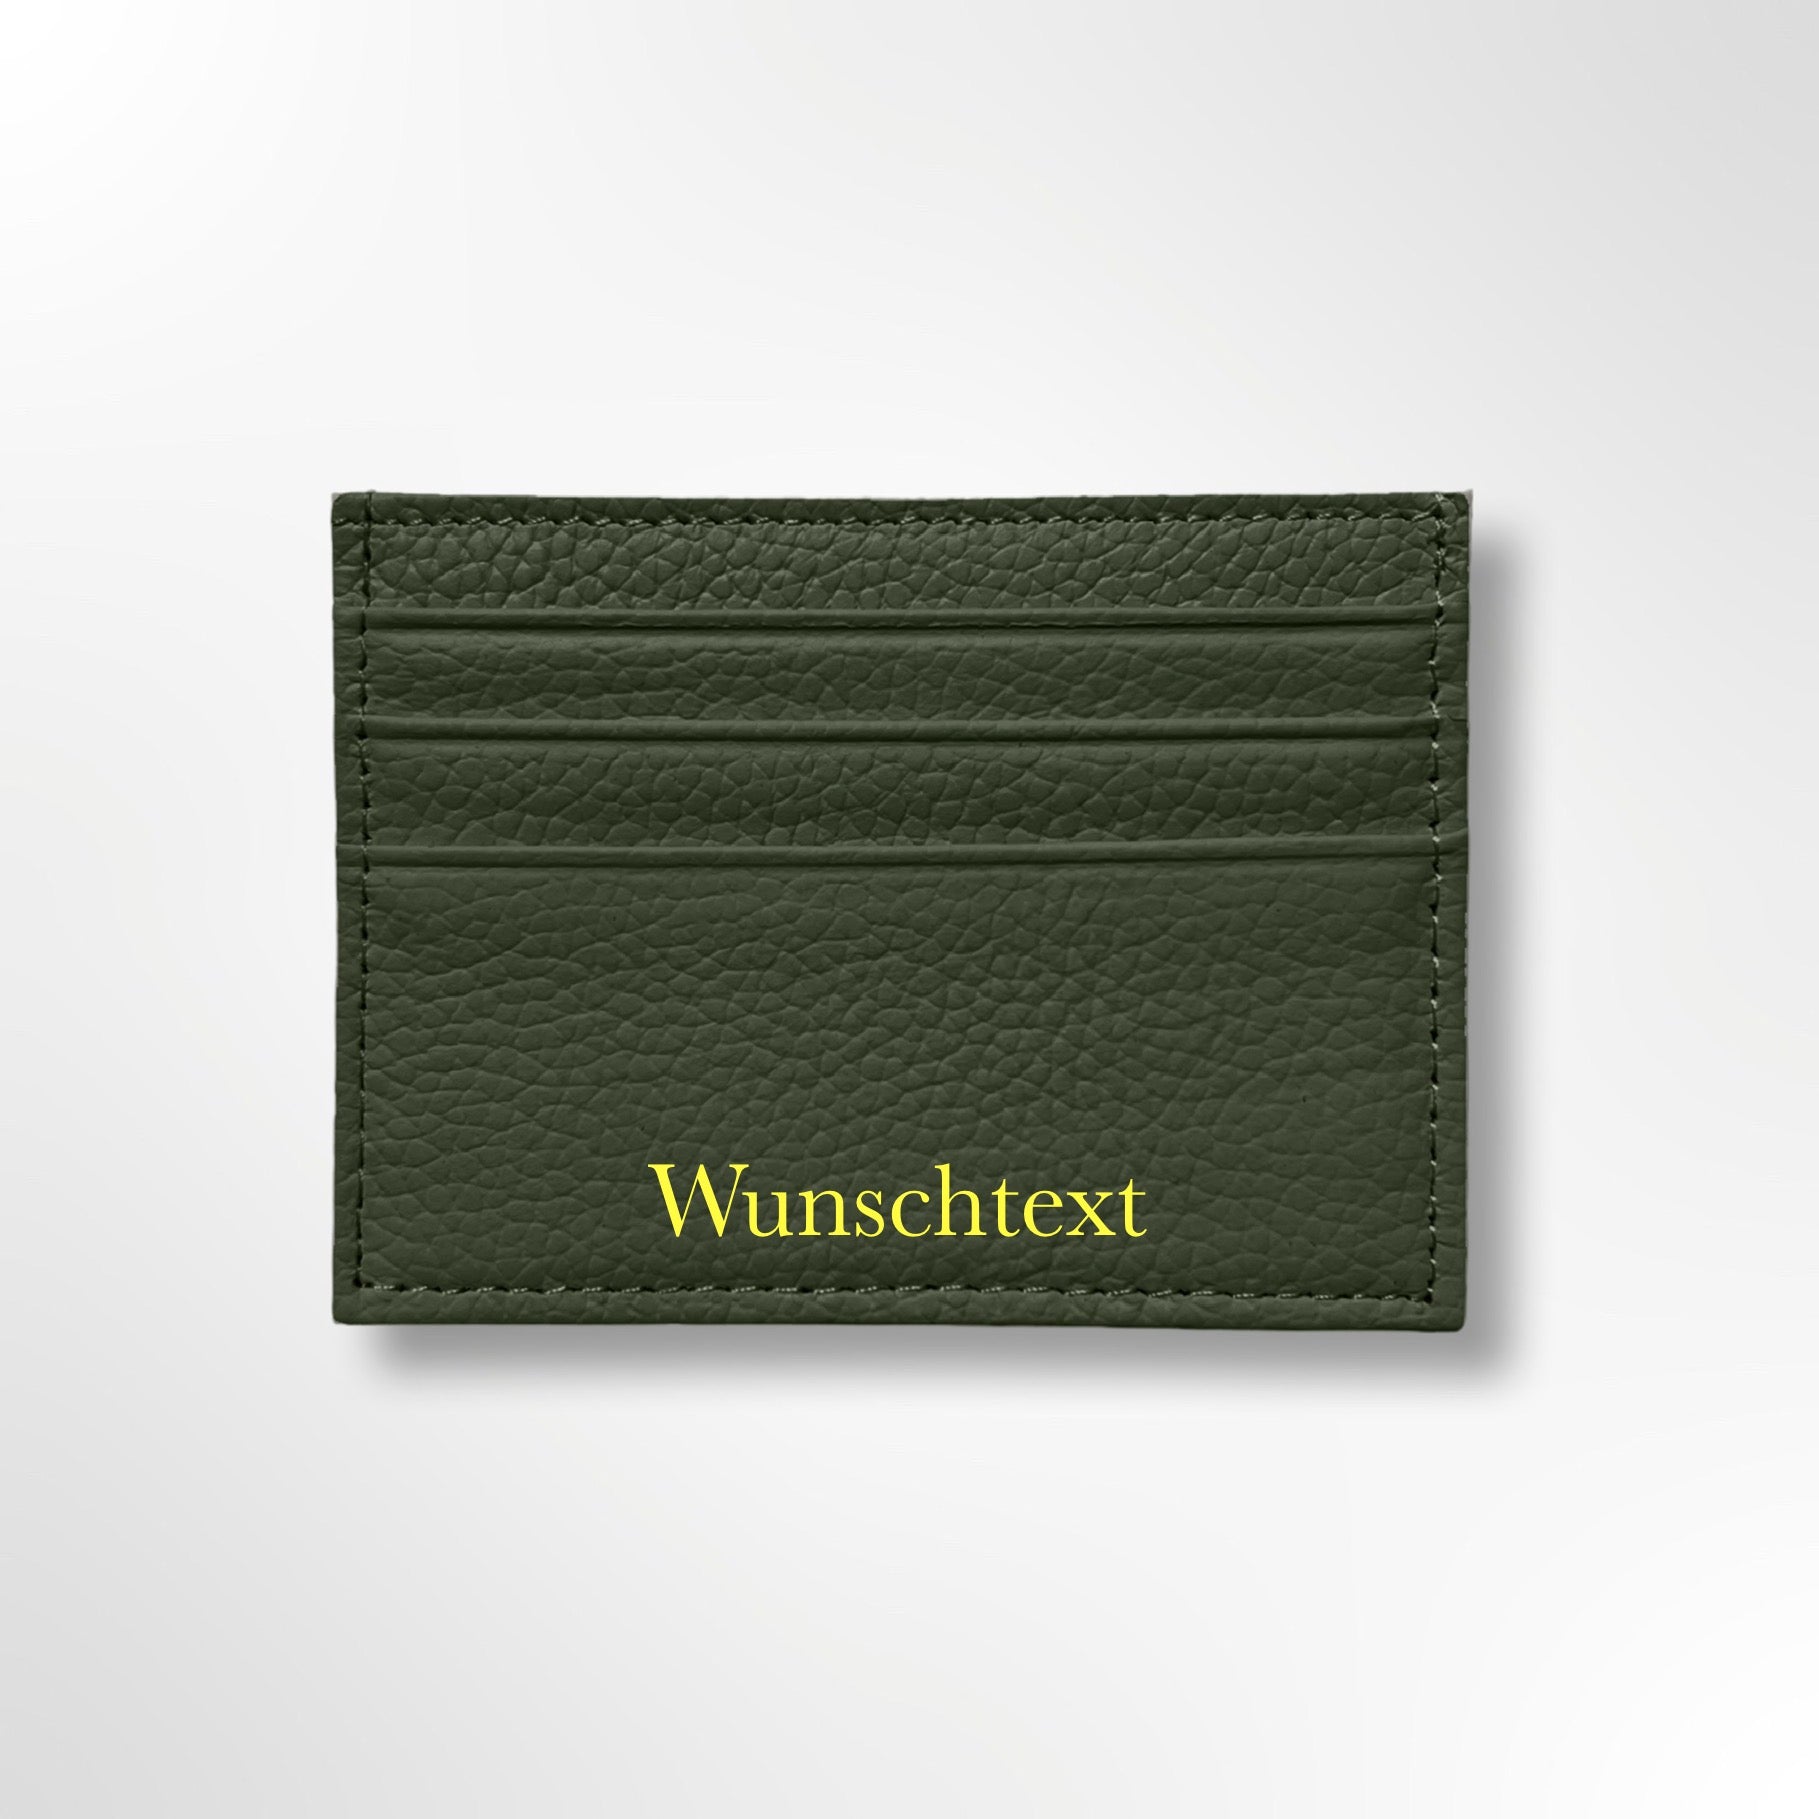 Card case personalized